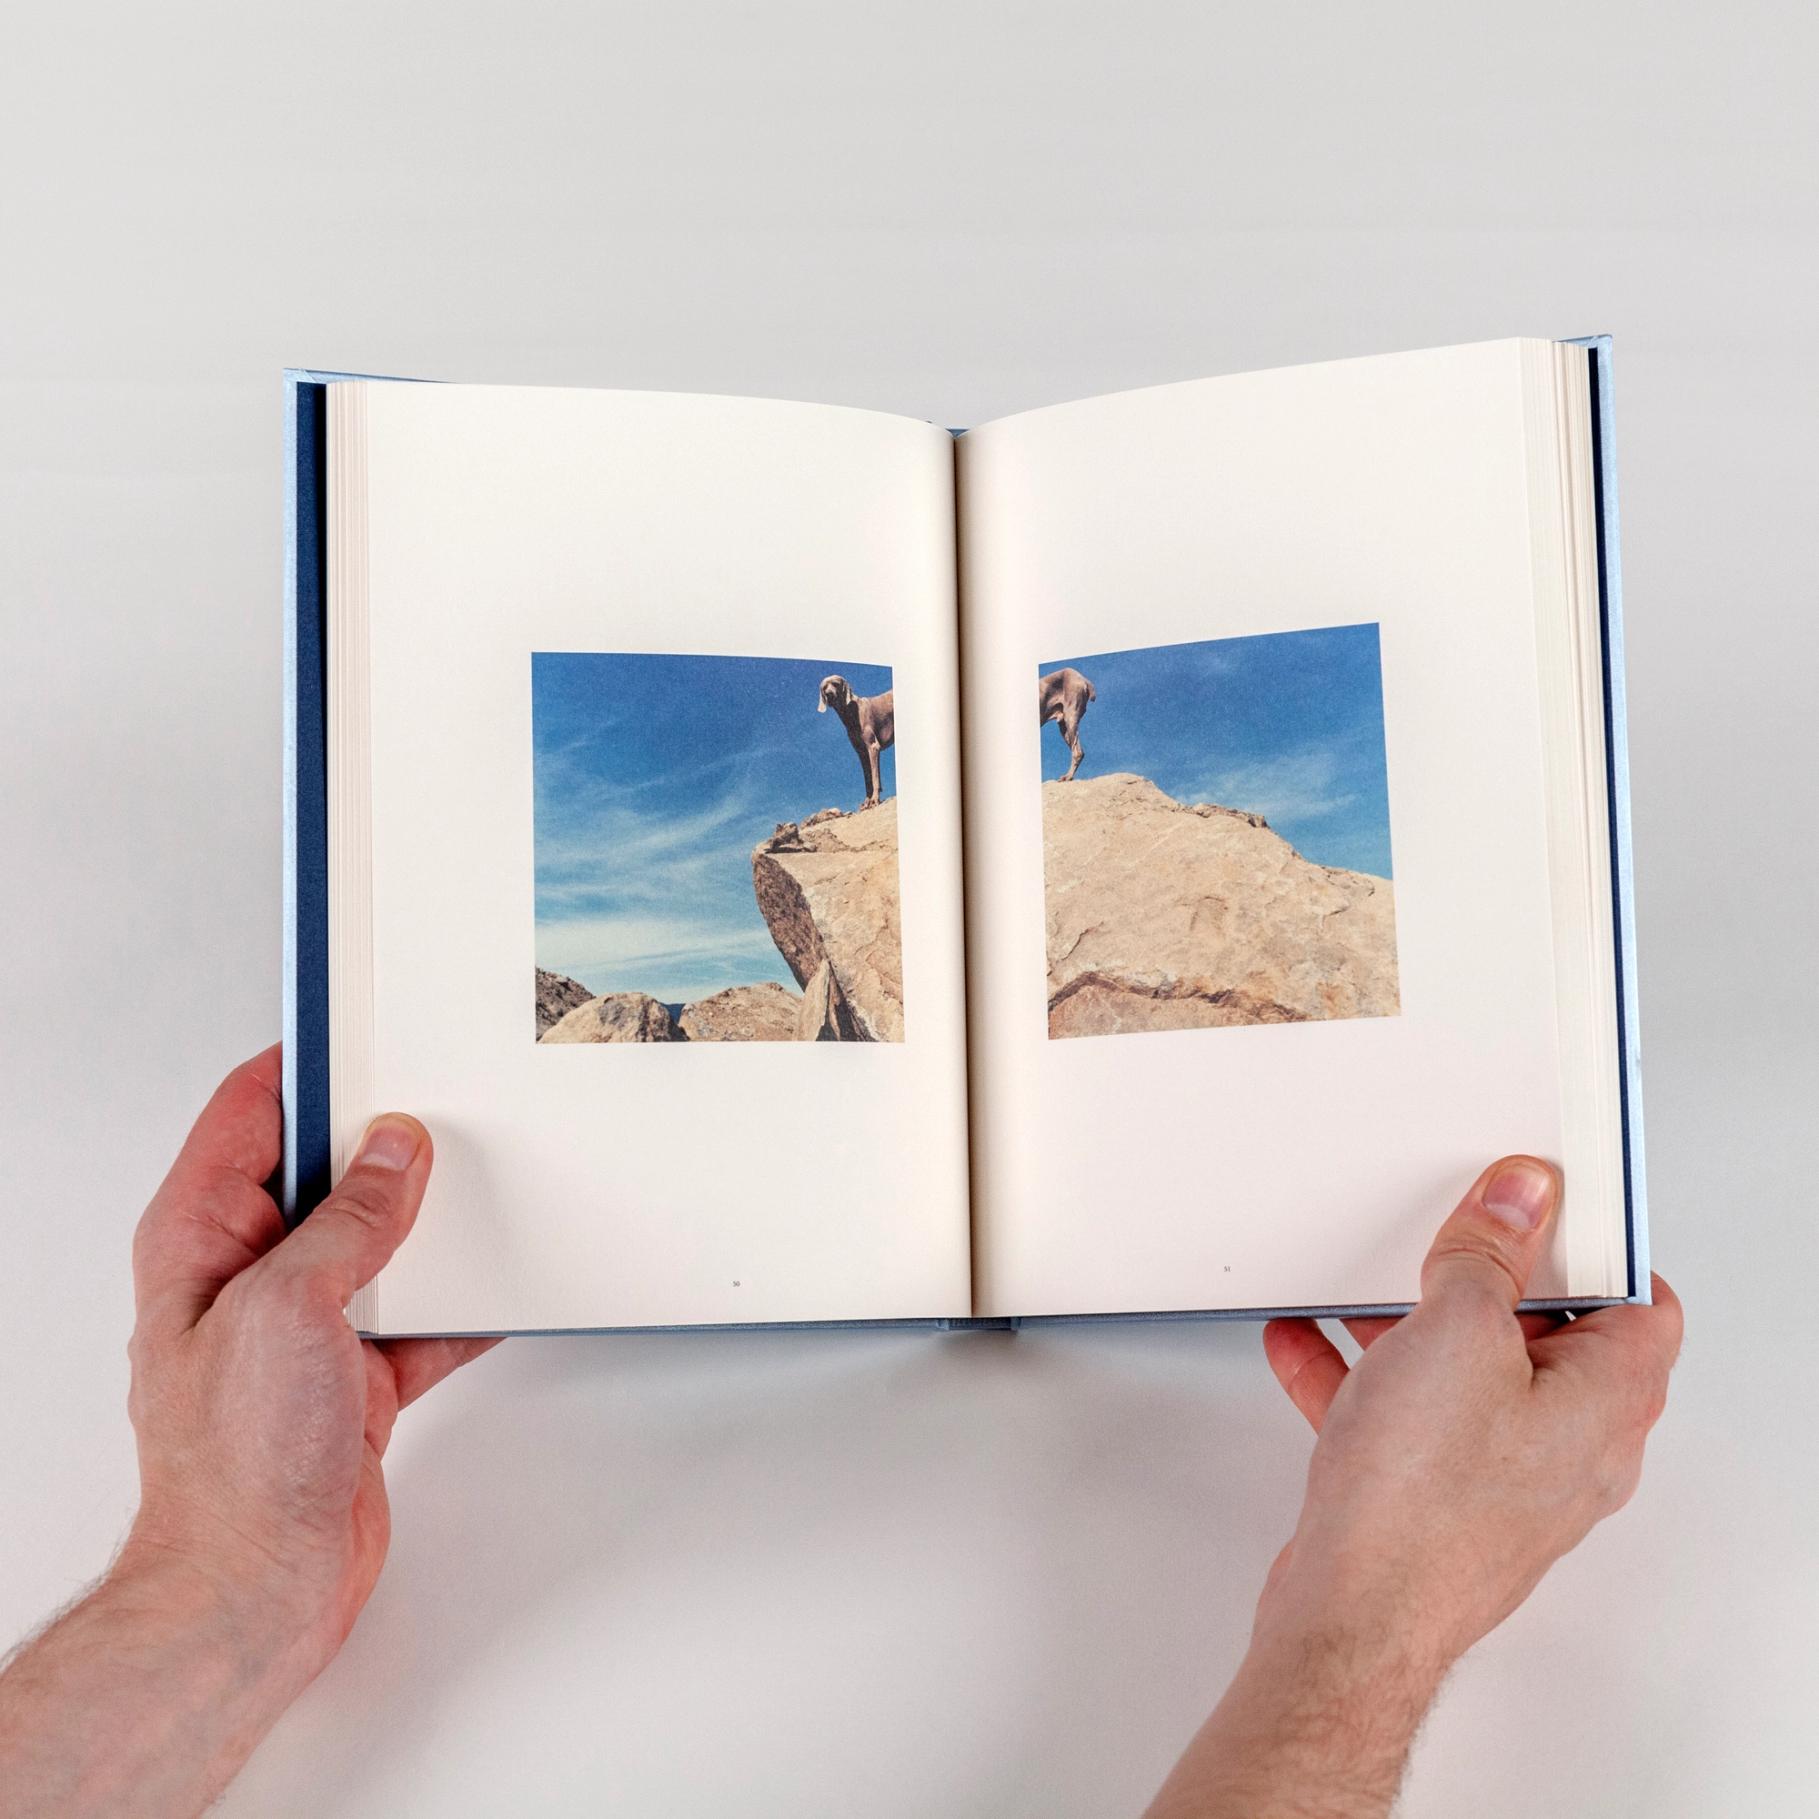 Two hands hold a book open. Two square photographs lie at the center of each page, creating the effect of a spread. Together, the images feature a large brown dog atop a boulder, looking at the camera with a blue sky behind it.